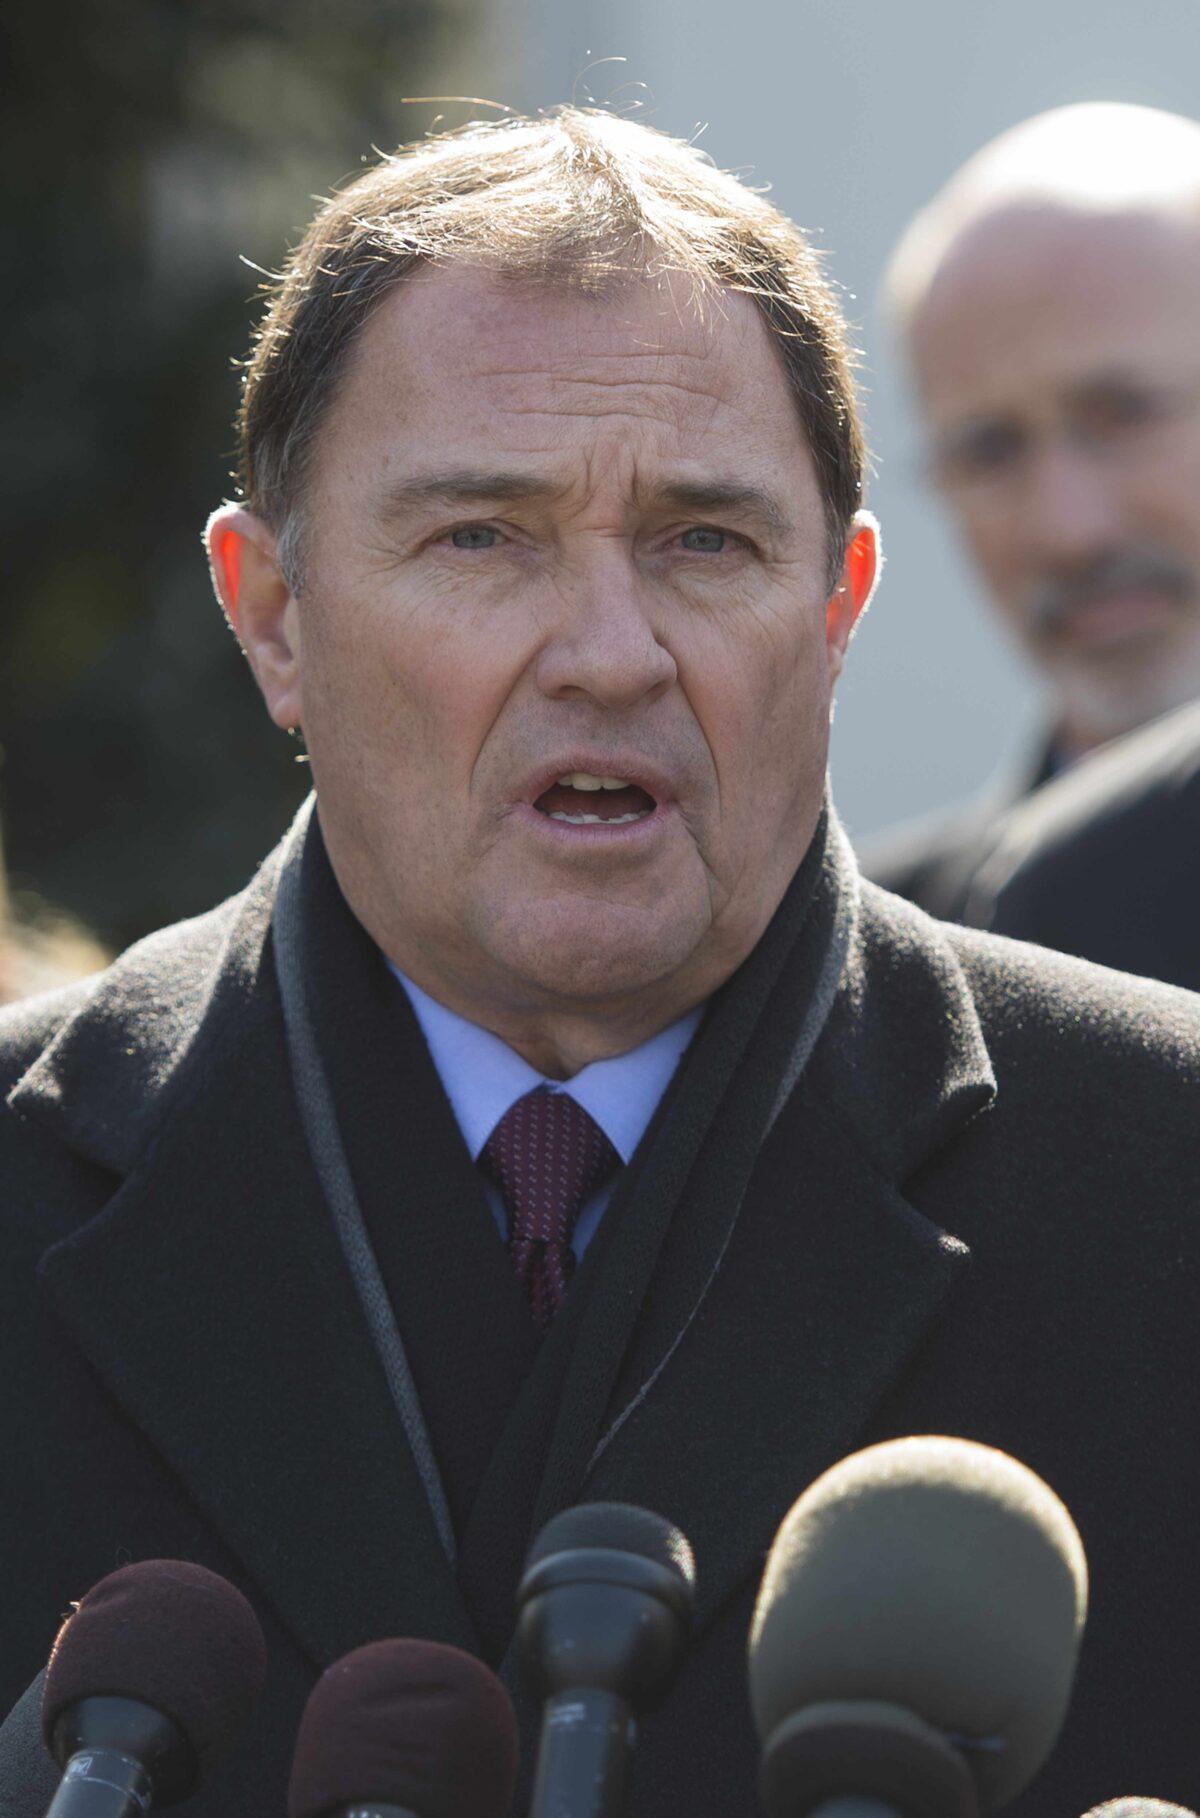 Utah Gov. Gary Herbert speaks after a meeting of the National Governors Association at the White House on Feb. 23, 2015. (Jim Watson/AFP via Getty Images)